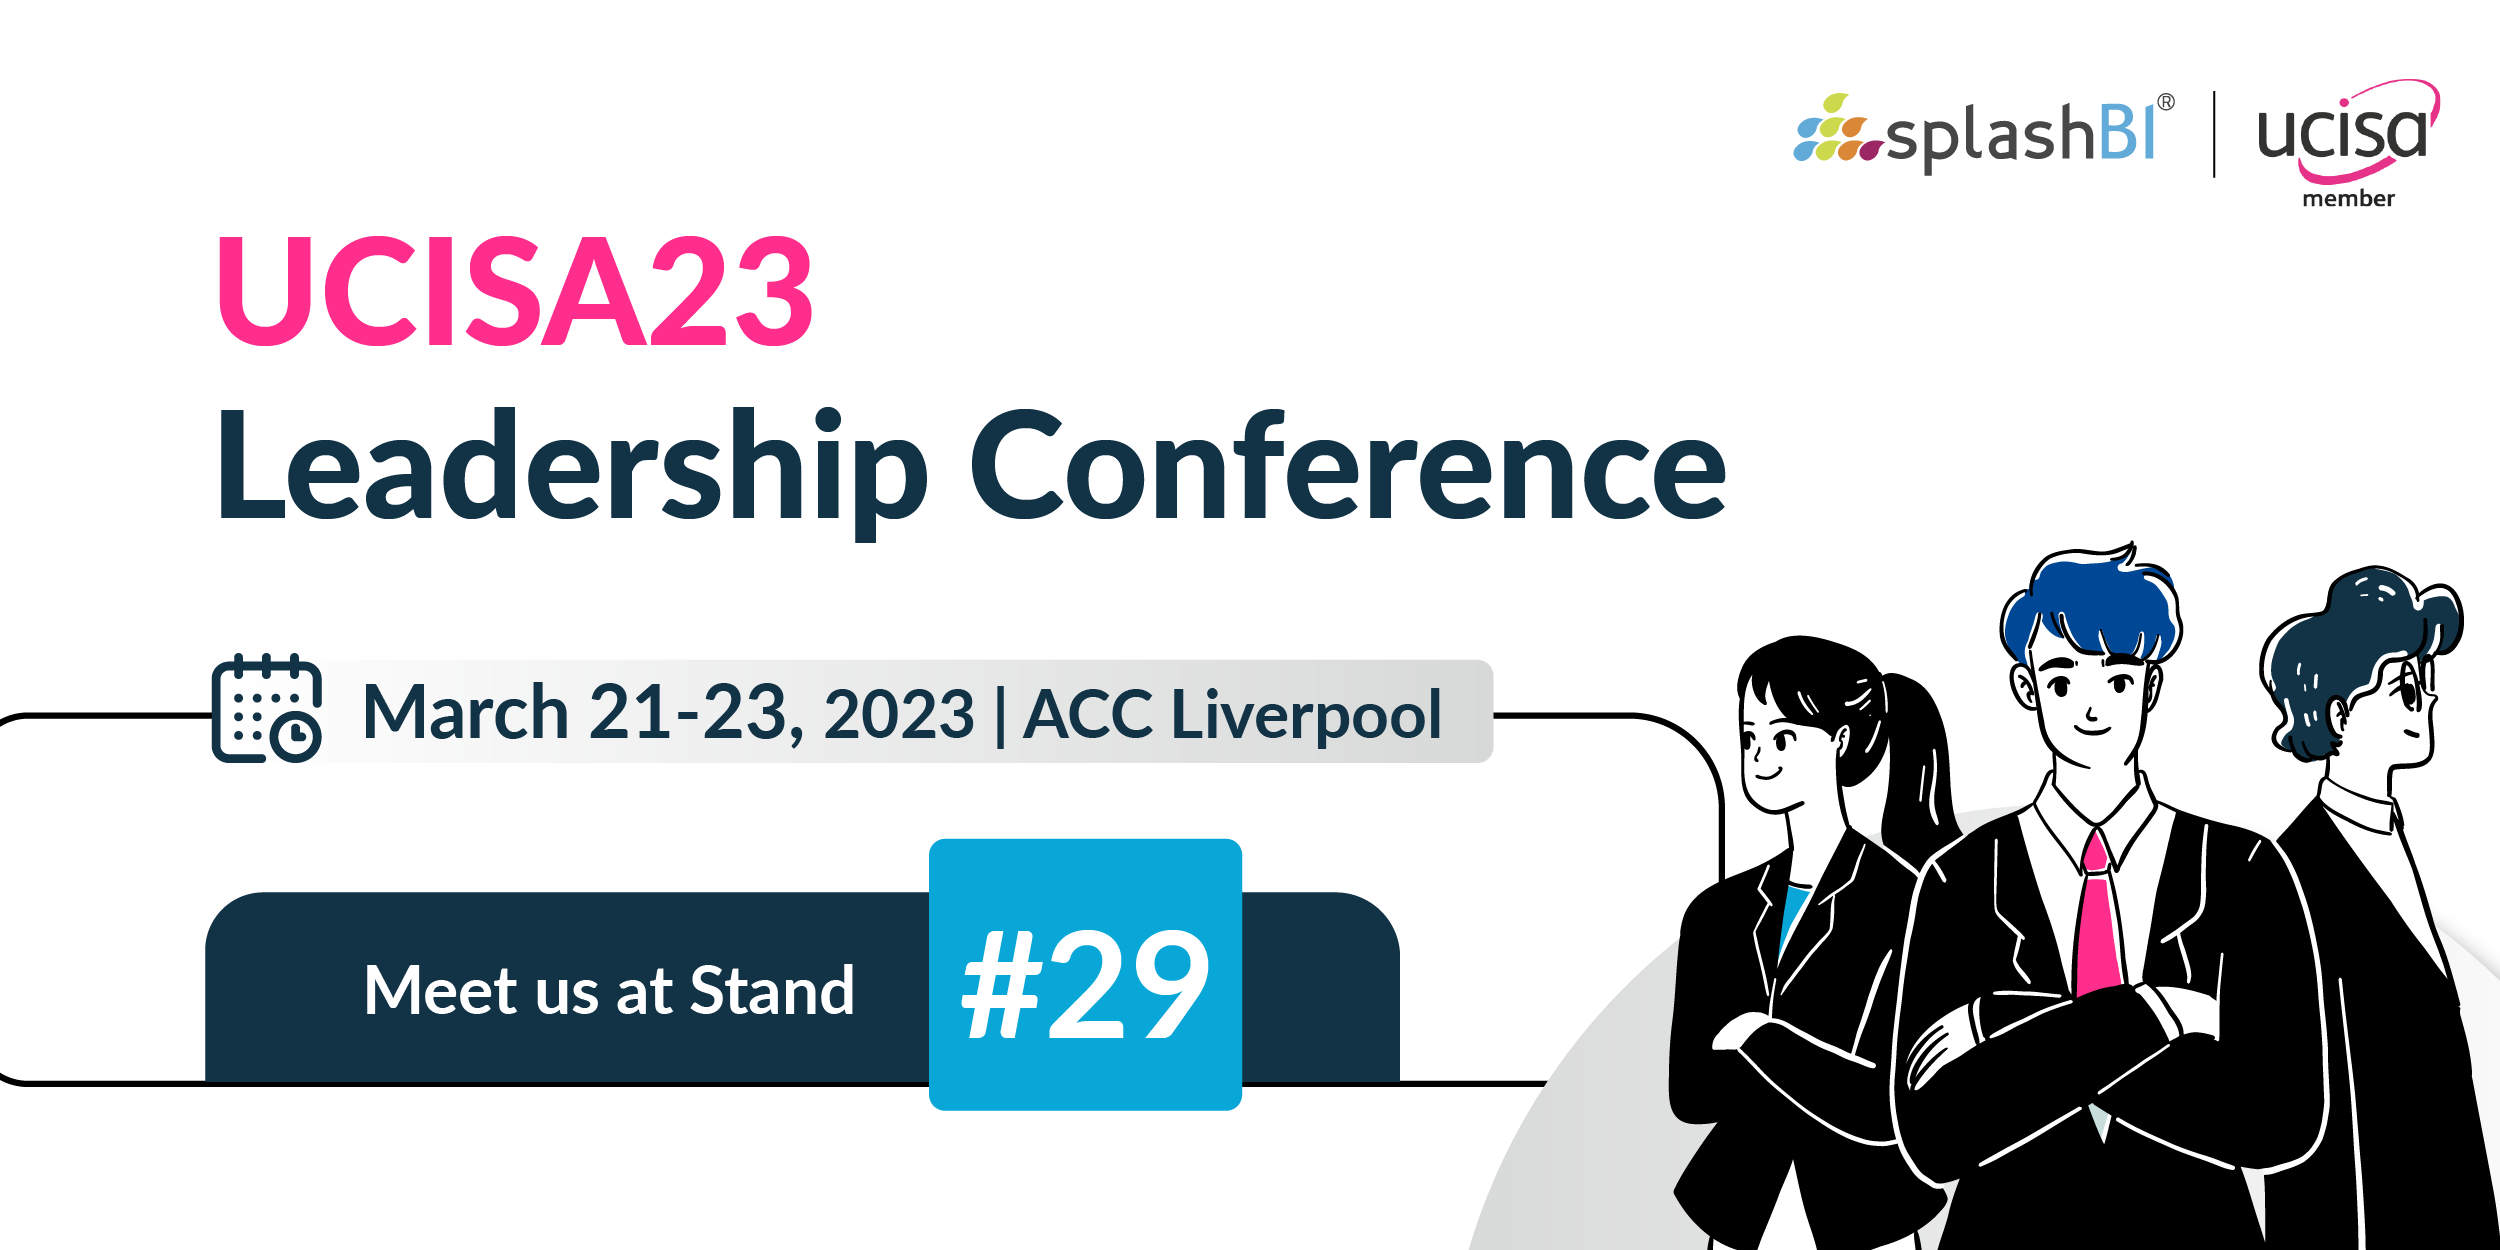 UCISA23 Leadership Conference 52